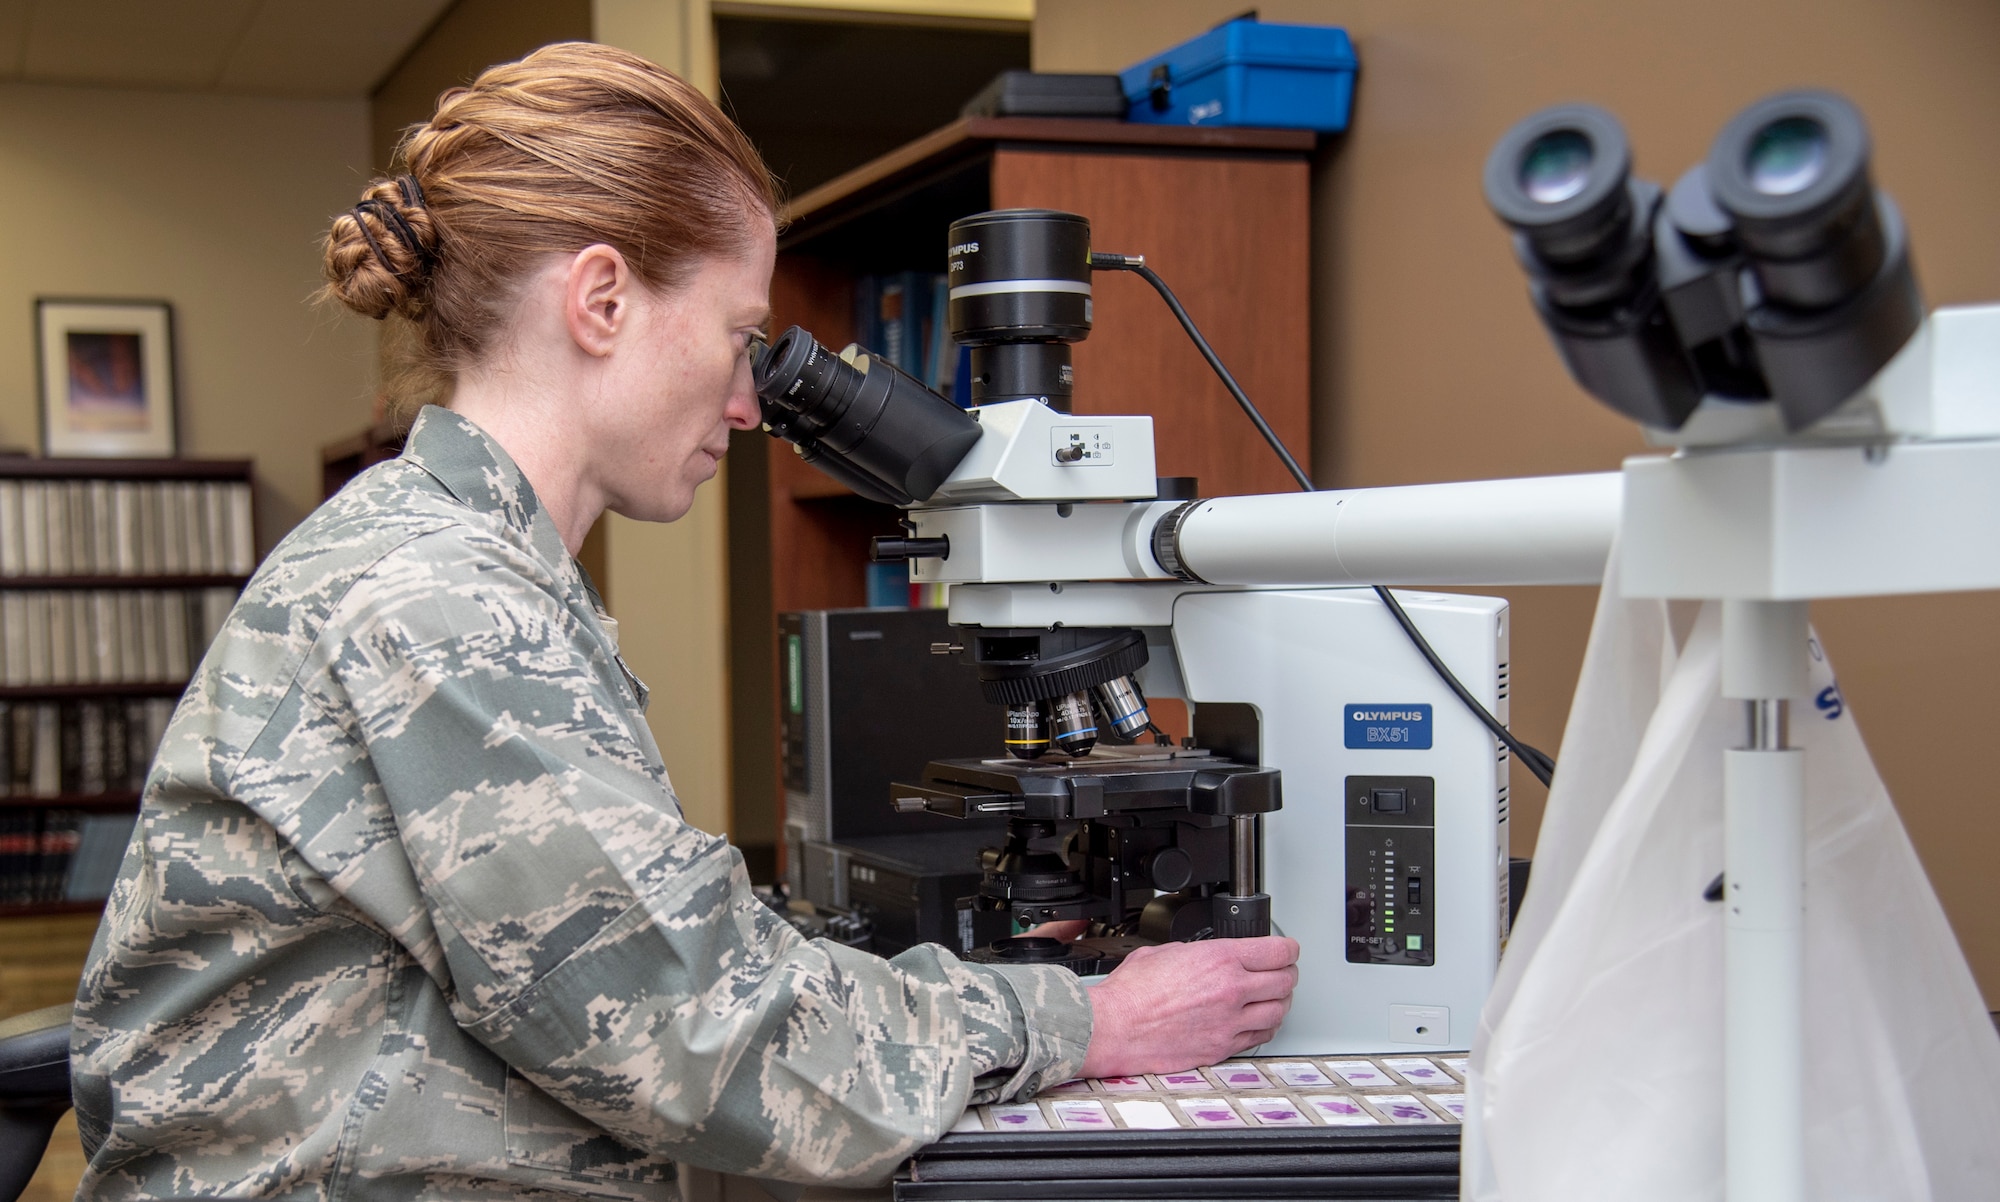 U.S. Air Force Lt. Col. Alice Briones, Armed Forces Medical Examiner System deputy director, looks at histology slides under a microscope June 7, 2018, at Dover Air Force Base, Delaware. Briones joined AFMES as deputy medical examiner in Rockville, Maryland in 2010, and Dover AFB, Delaware, and was appointed director of the DoD DNA Registry in 2014, coordinating services in both the Armed Forces Repository of Specimen Storage for Identification of Remains and the Armed Forces DNA Identification Laboratory. (U.S. Air Force photo by Staff Sgt. Nicole Leidholm)